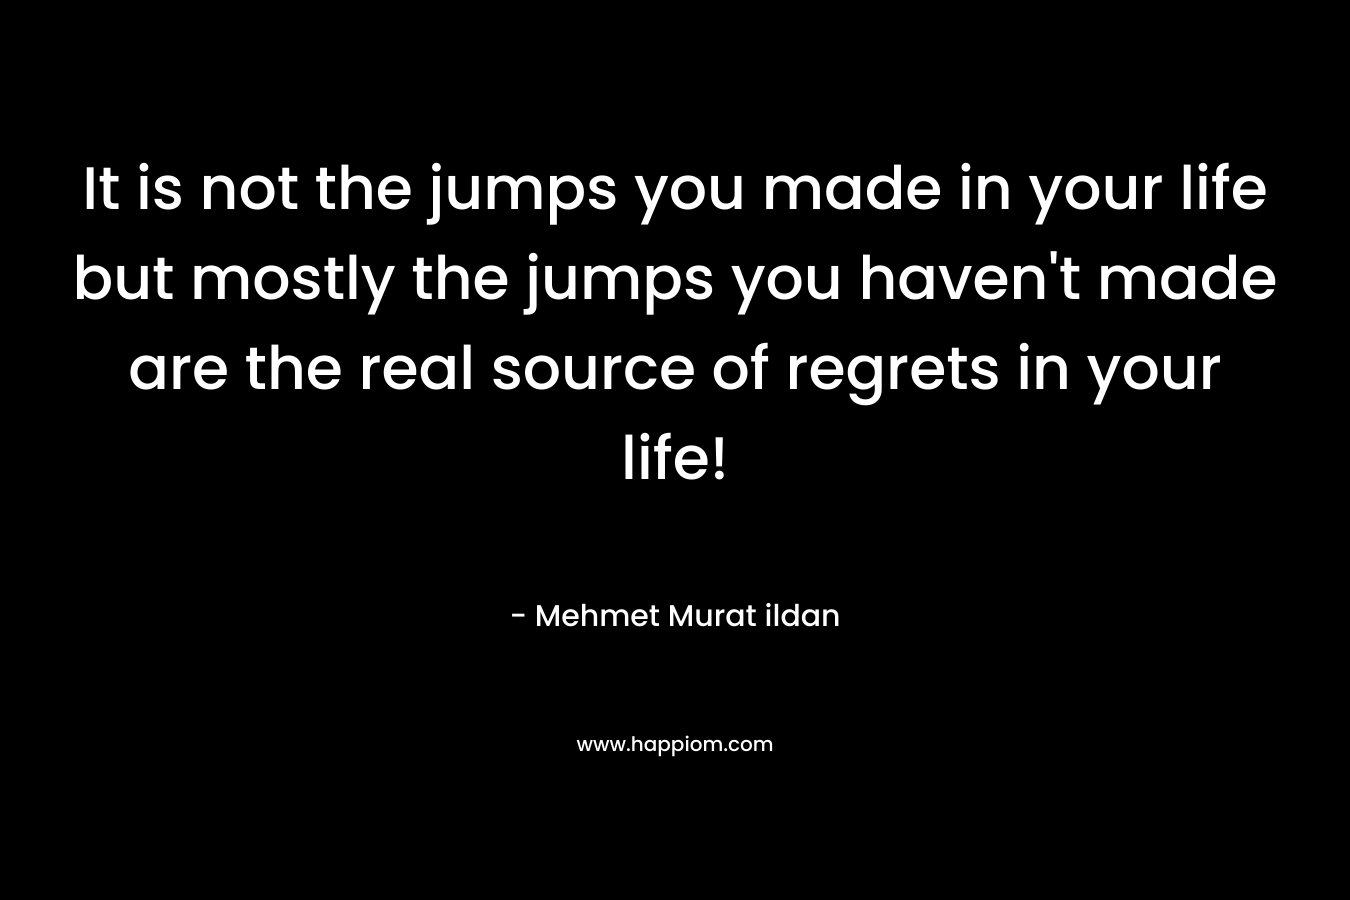 It is not the jumps you made in your life but mostly the jumps you haven't made are the real source of regrets in your life!